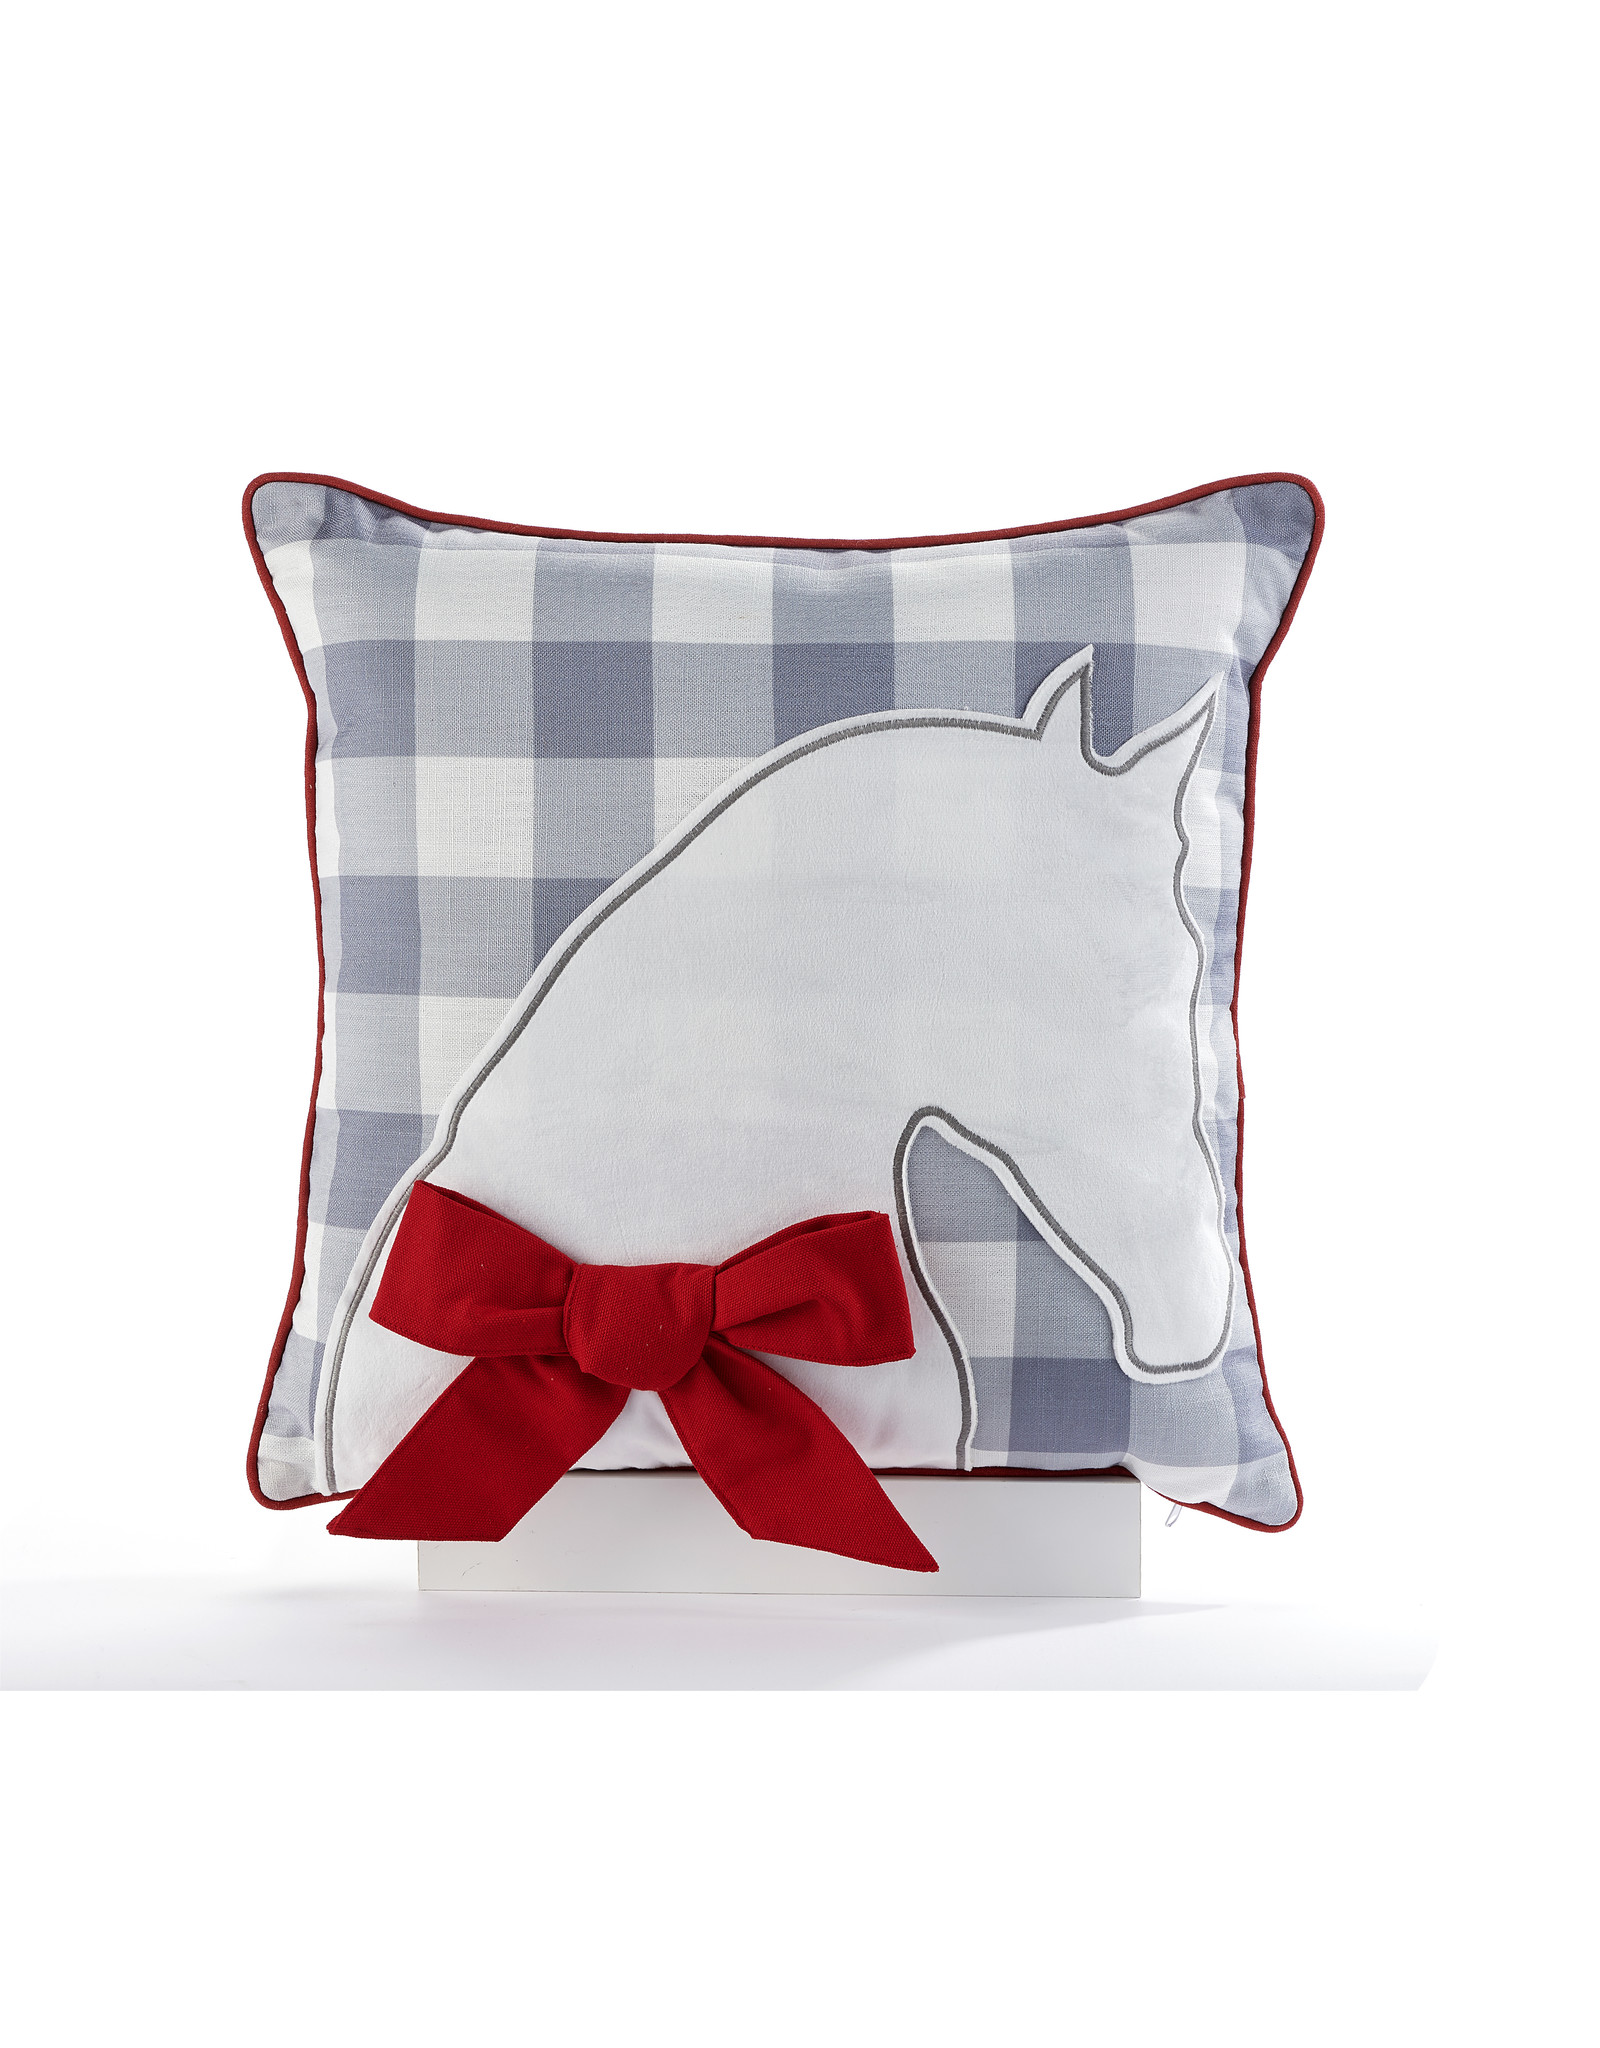 Giftcraft #682500 Double Sided Horse & Plaid Pillow Cover